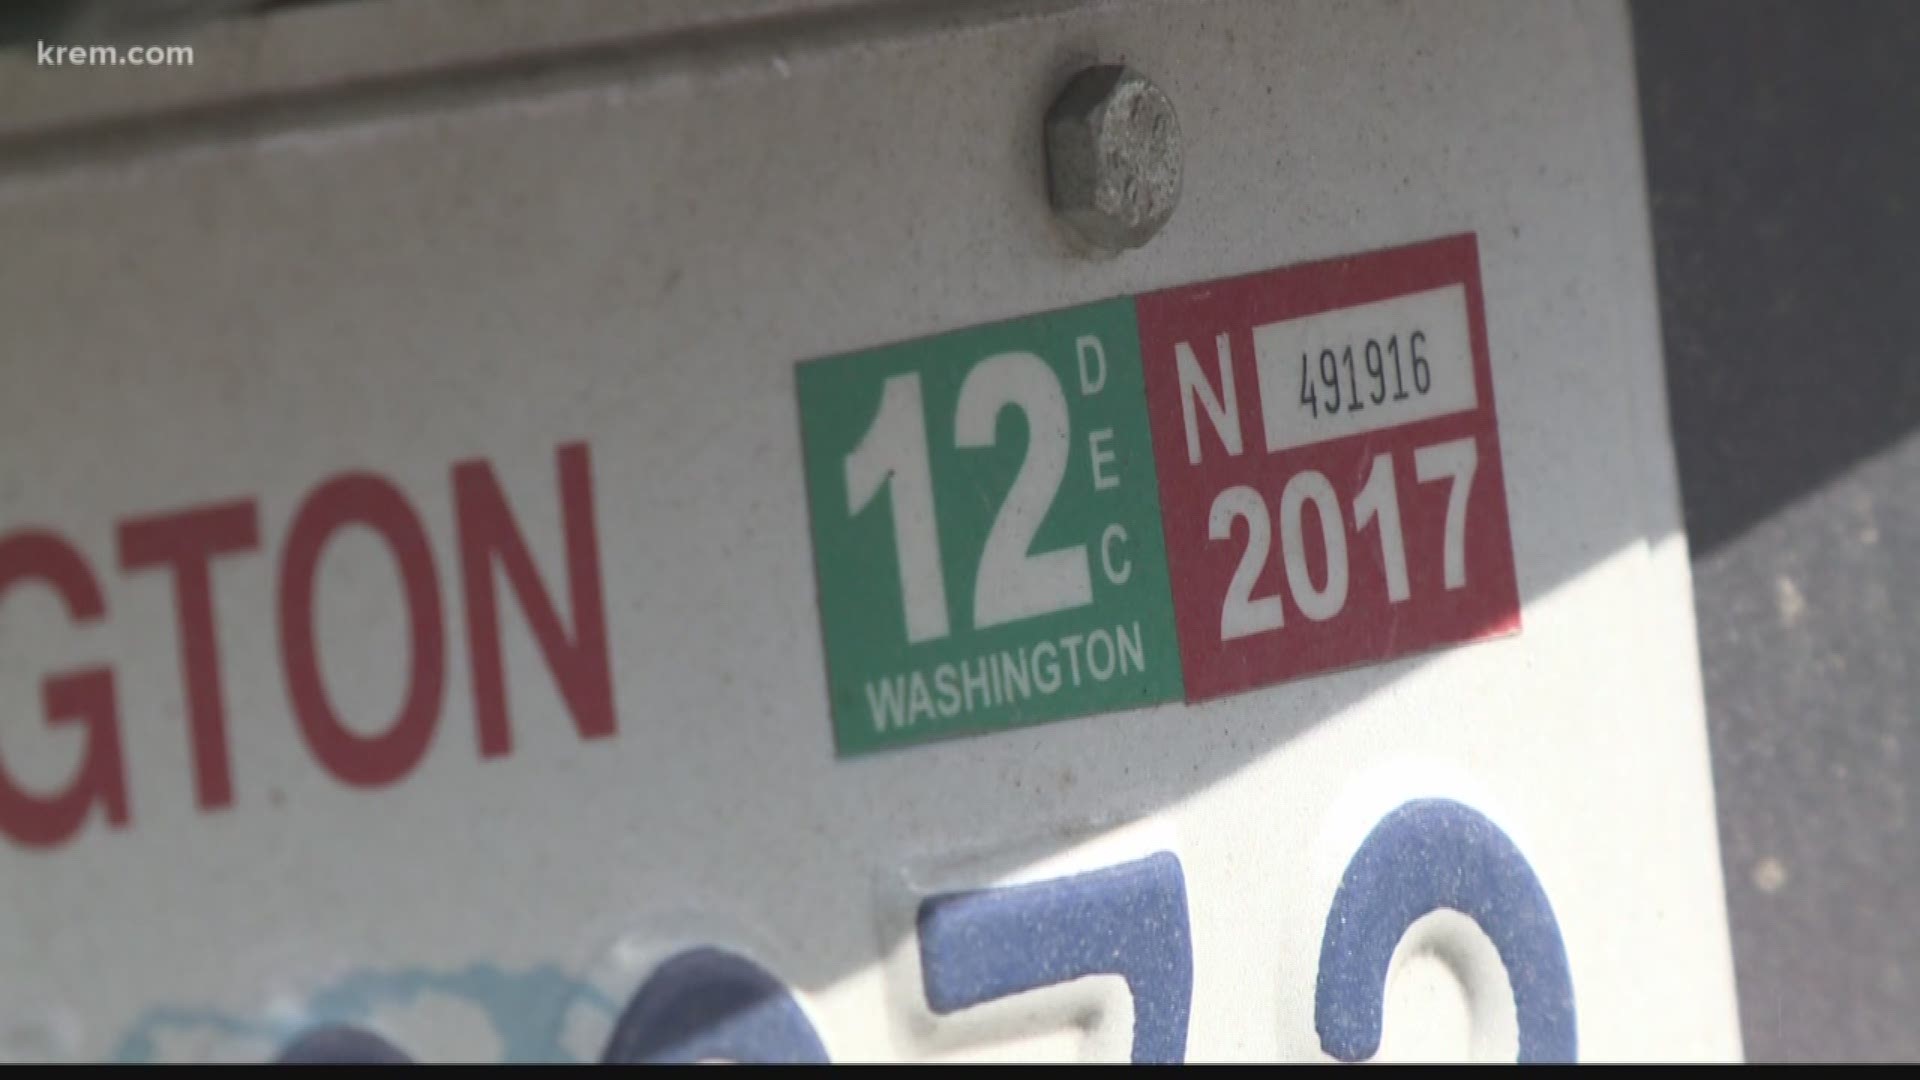 The sponsor of Initiative 9-76, is encouraging vehicle owners to *not pay their car tabs if the bill includes fees and taxes eliminated by the initiative.